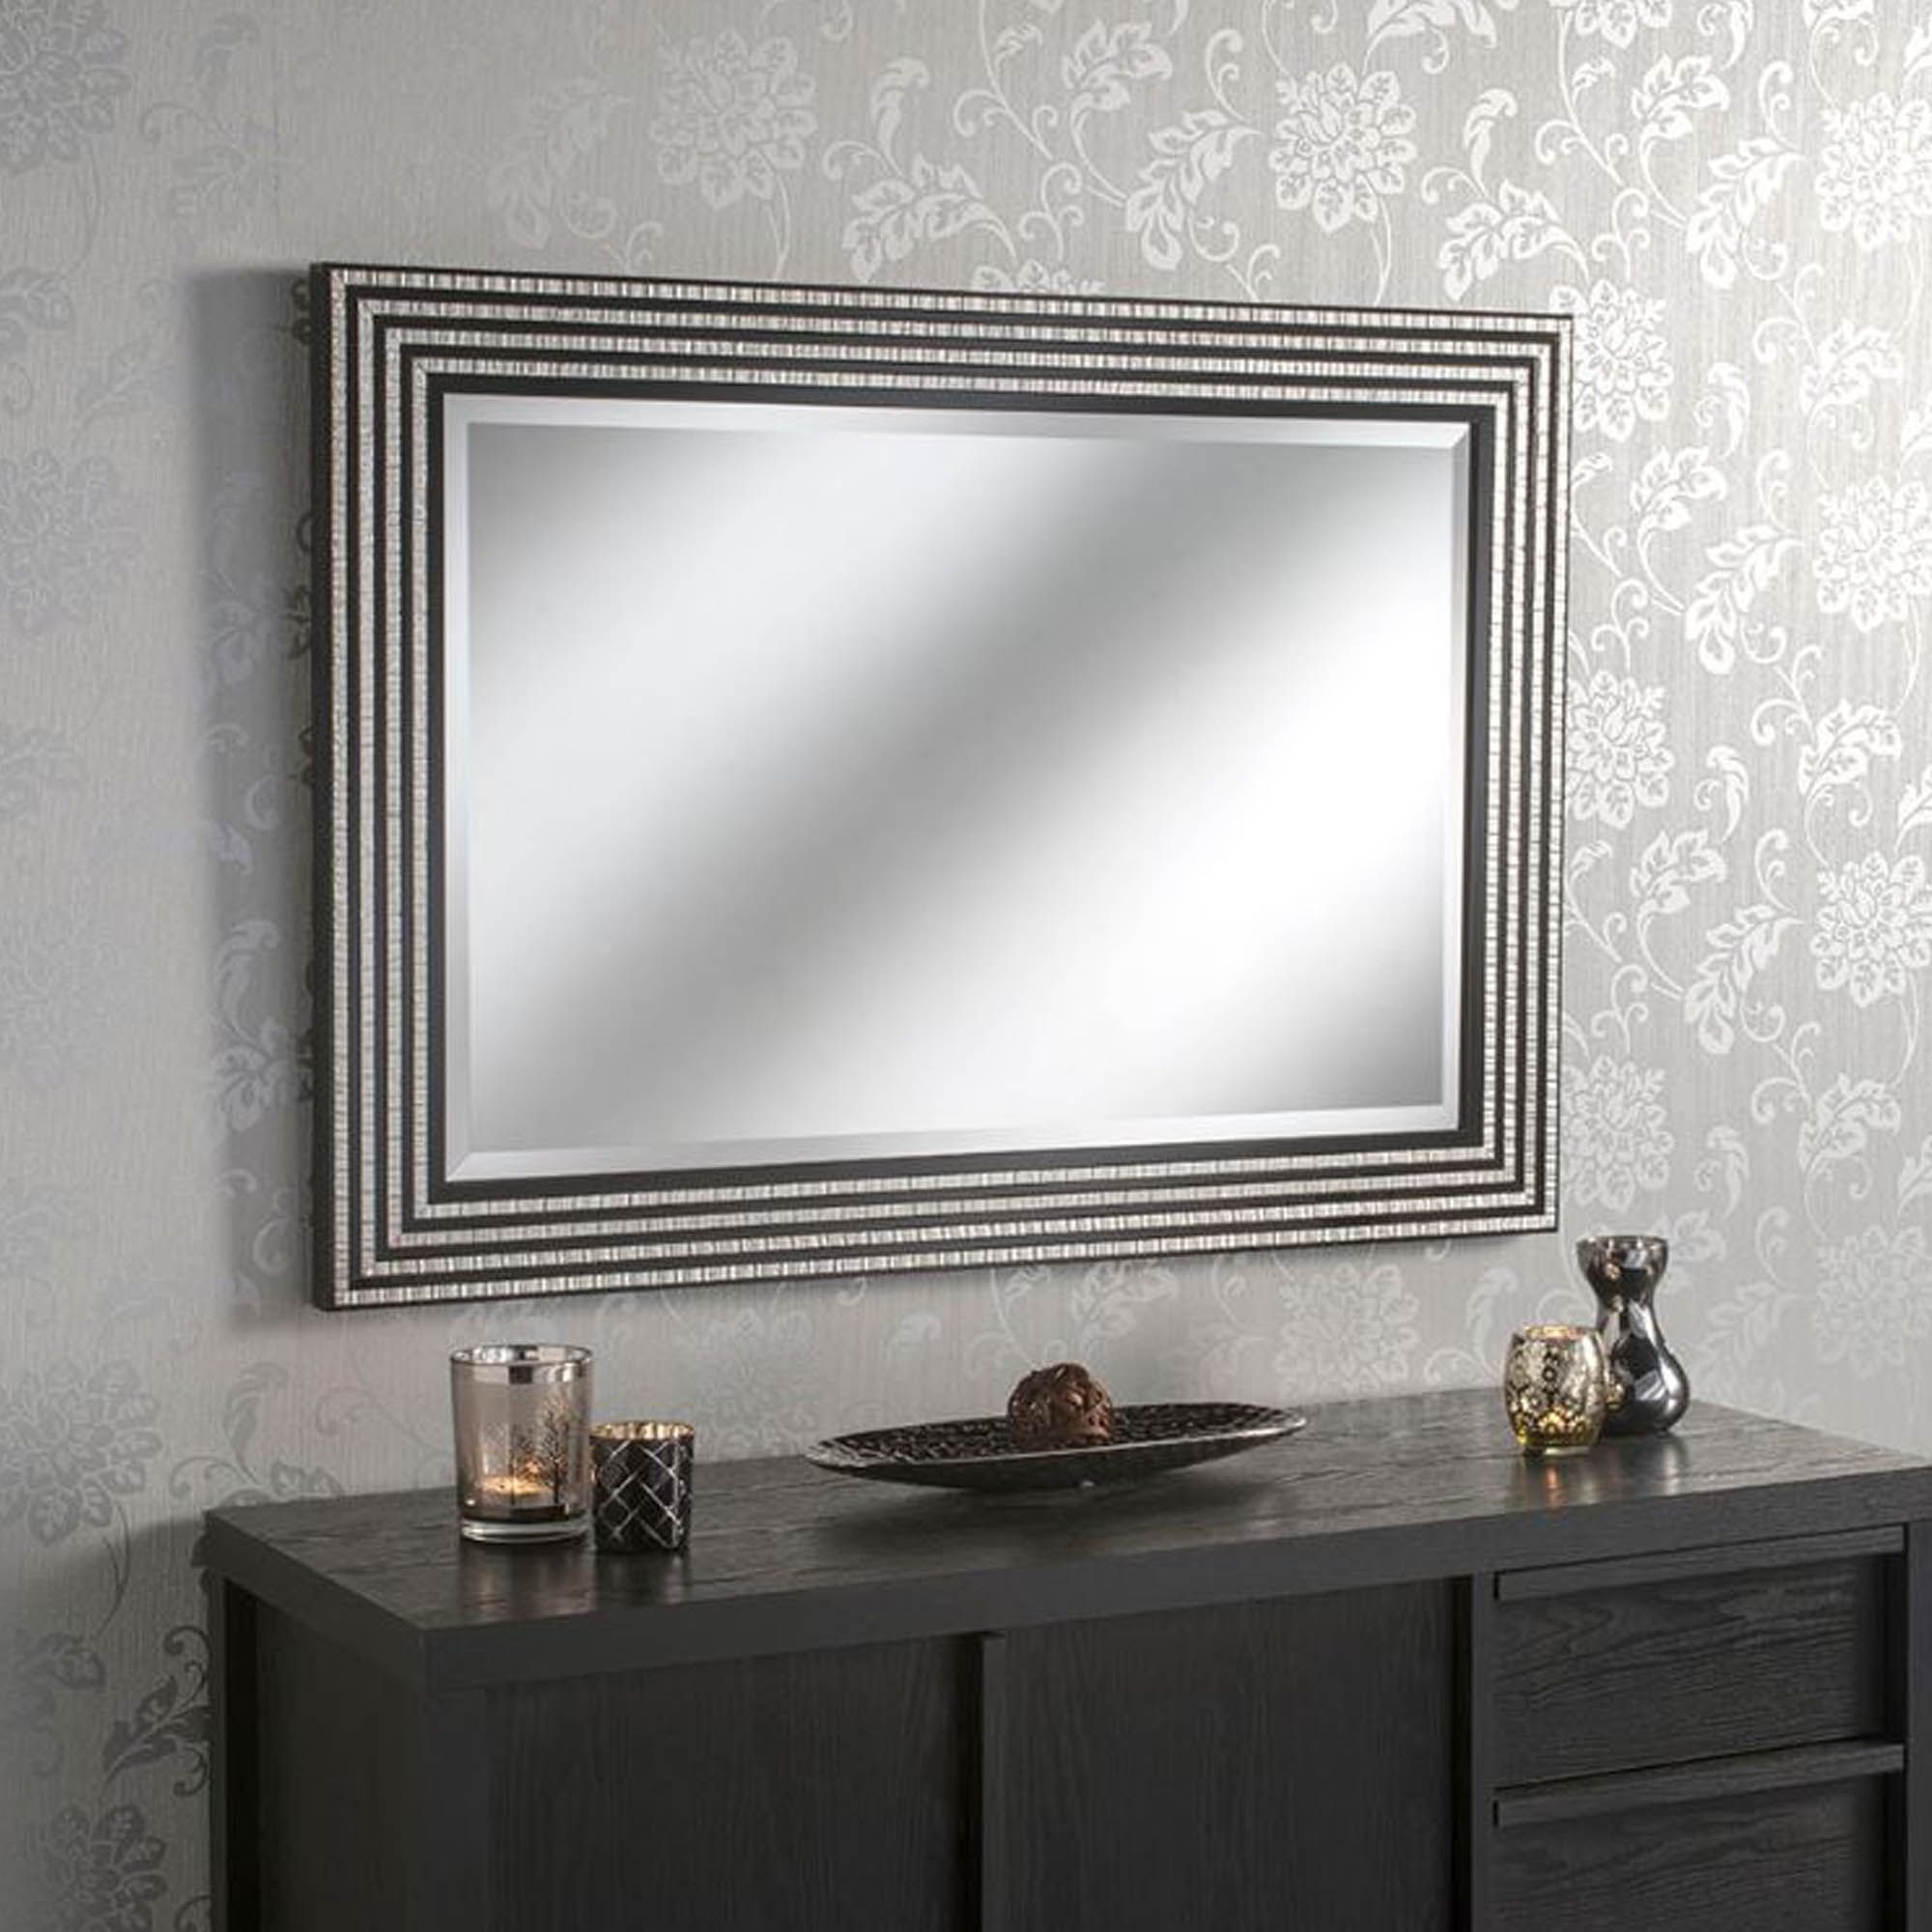 Black And Silver Line Rectangular Wall Mirror | Homesdirect365 Regarding Black Wall Mirrors (View 3 of 15)